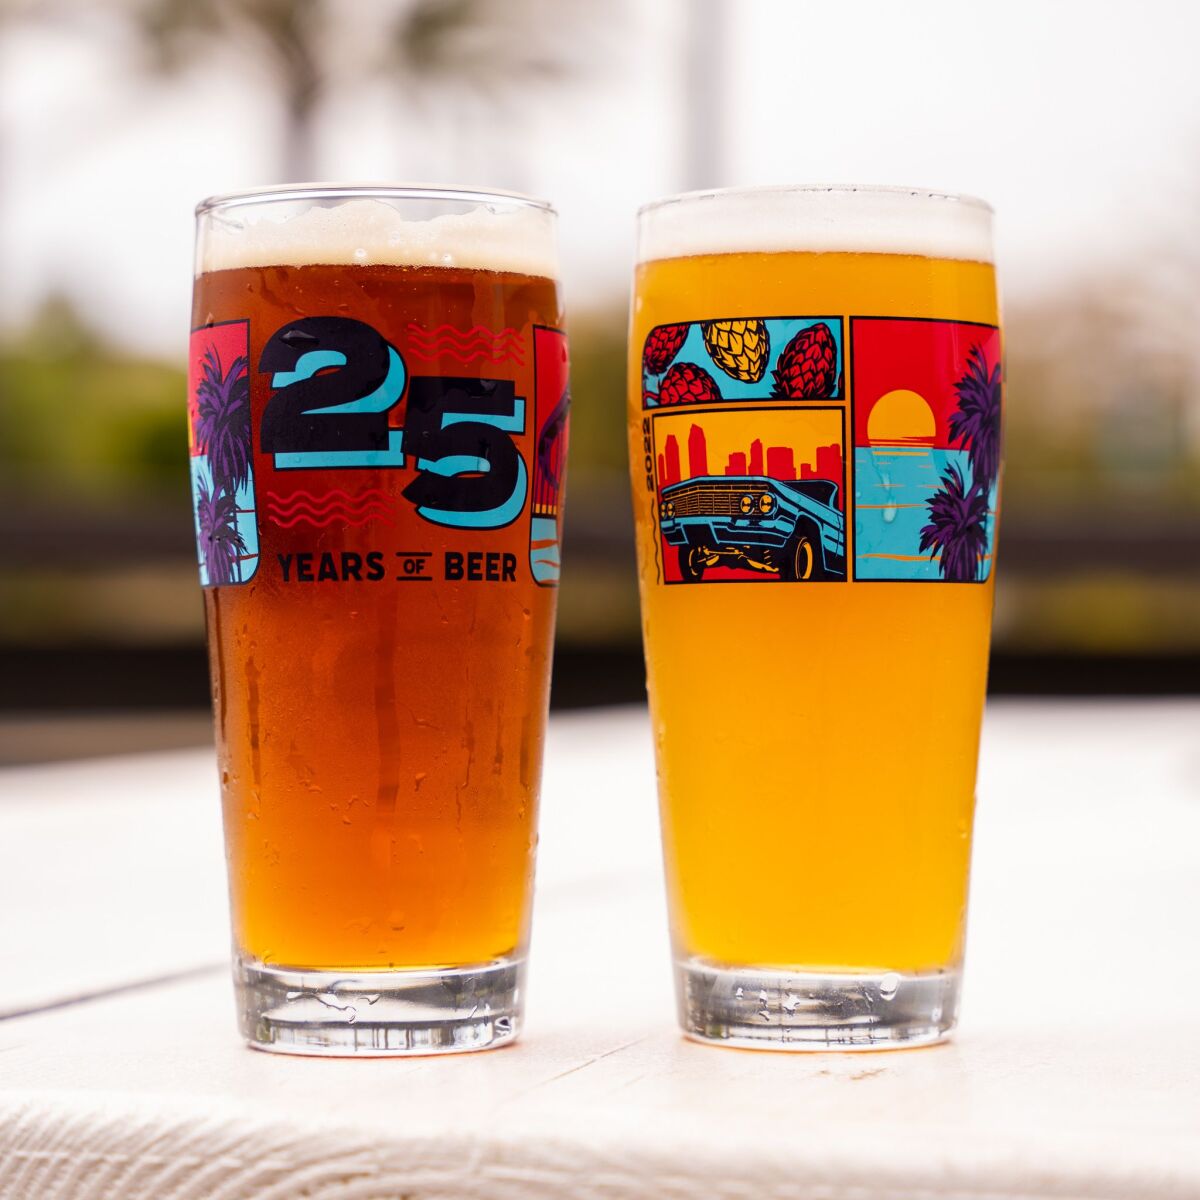 Special anniversary glassware can be purchased at Westbrew in Del Mar and the Northern Pine tasting room in Carmel Valley.